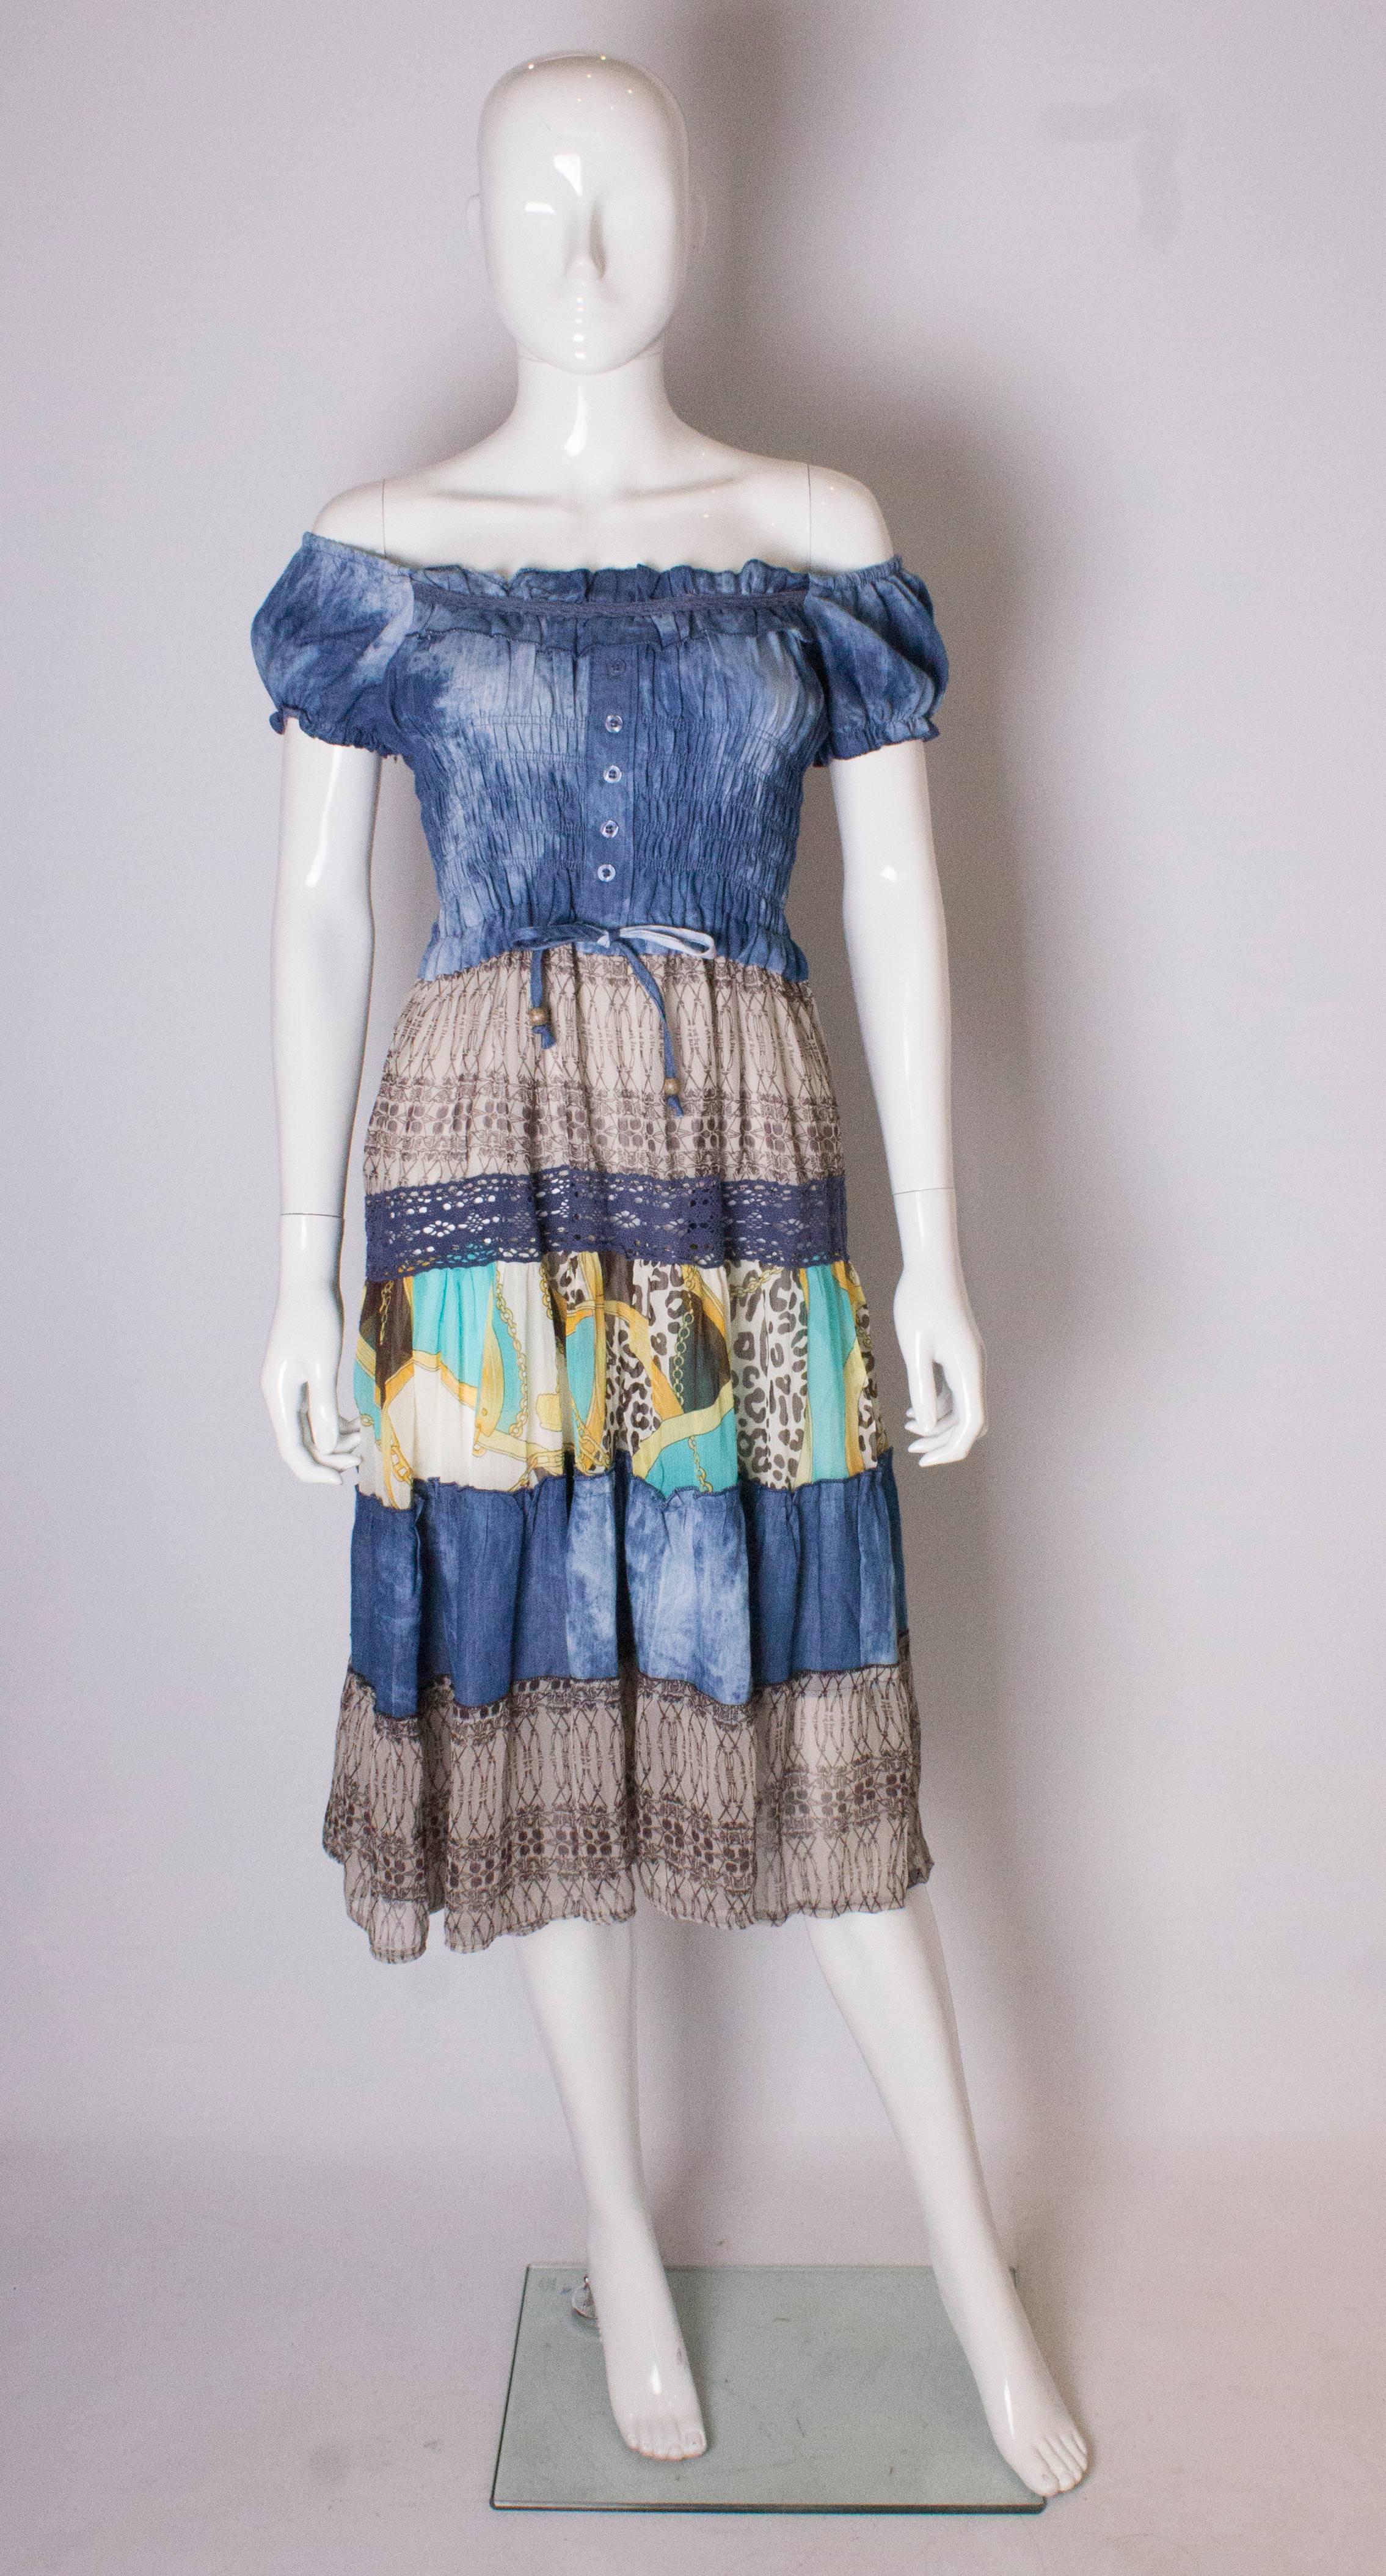 1970s  vintage  boho  Summer dress, it has a blue top half with elasticated off the shoulder neck /shoulder line. The skirt has tiers of silk, and the dress is fully lined.